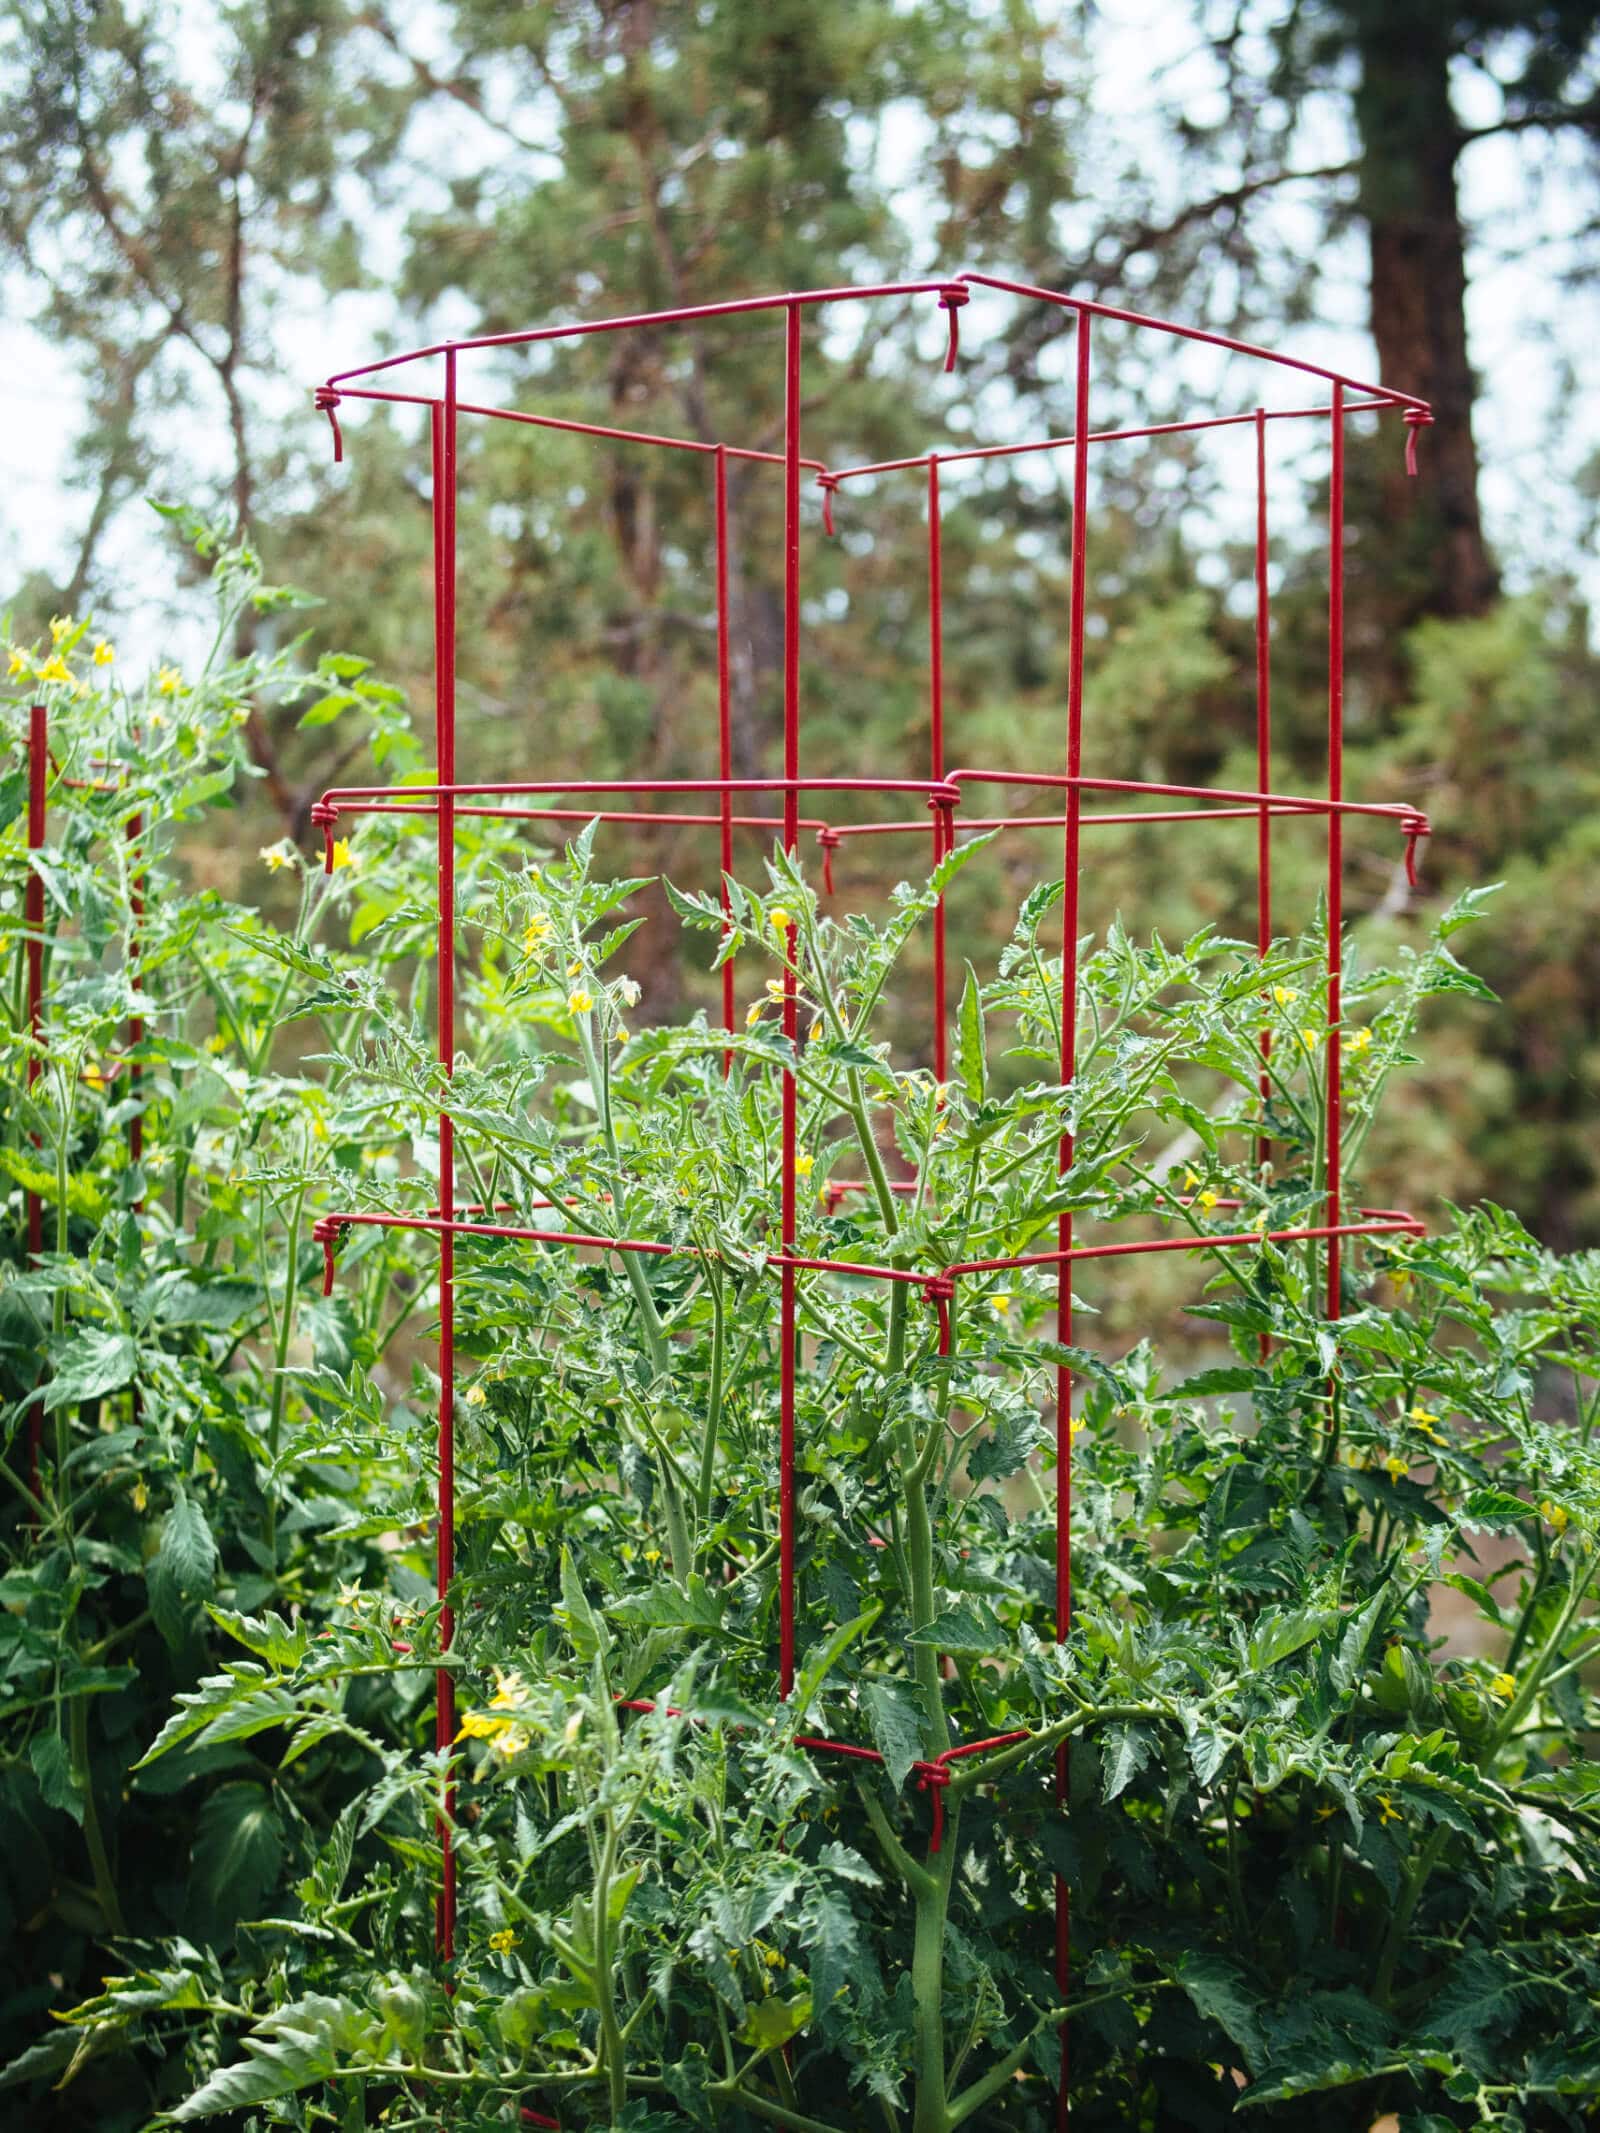 Heavy-gauge square cages help contain and support tomato plants in pots